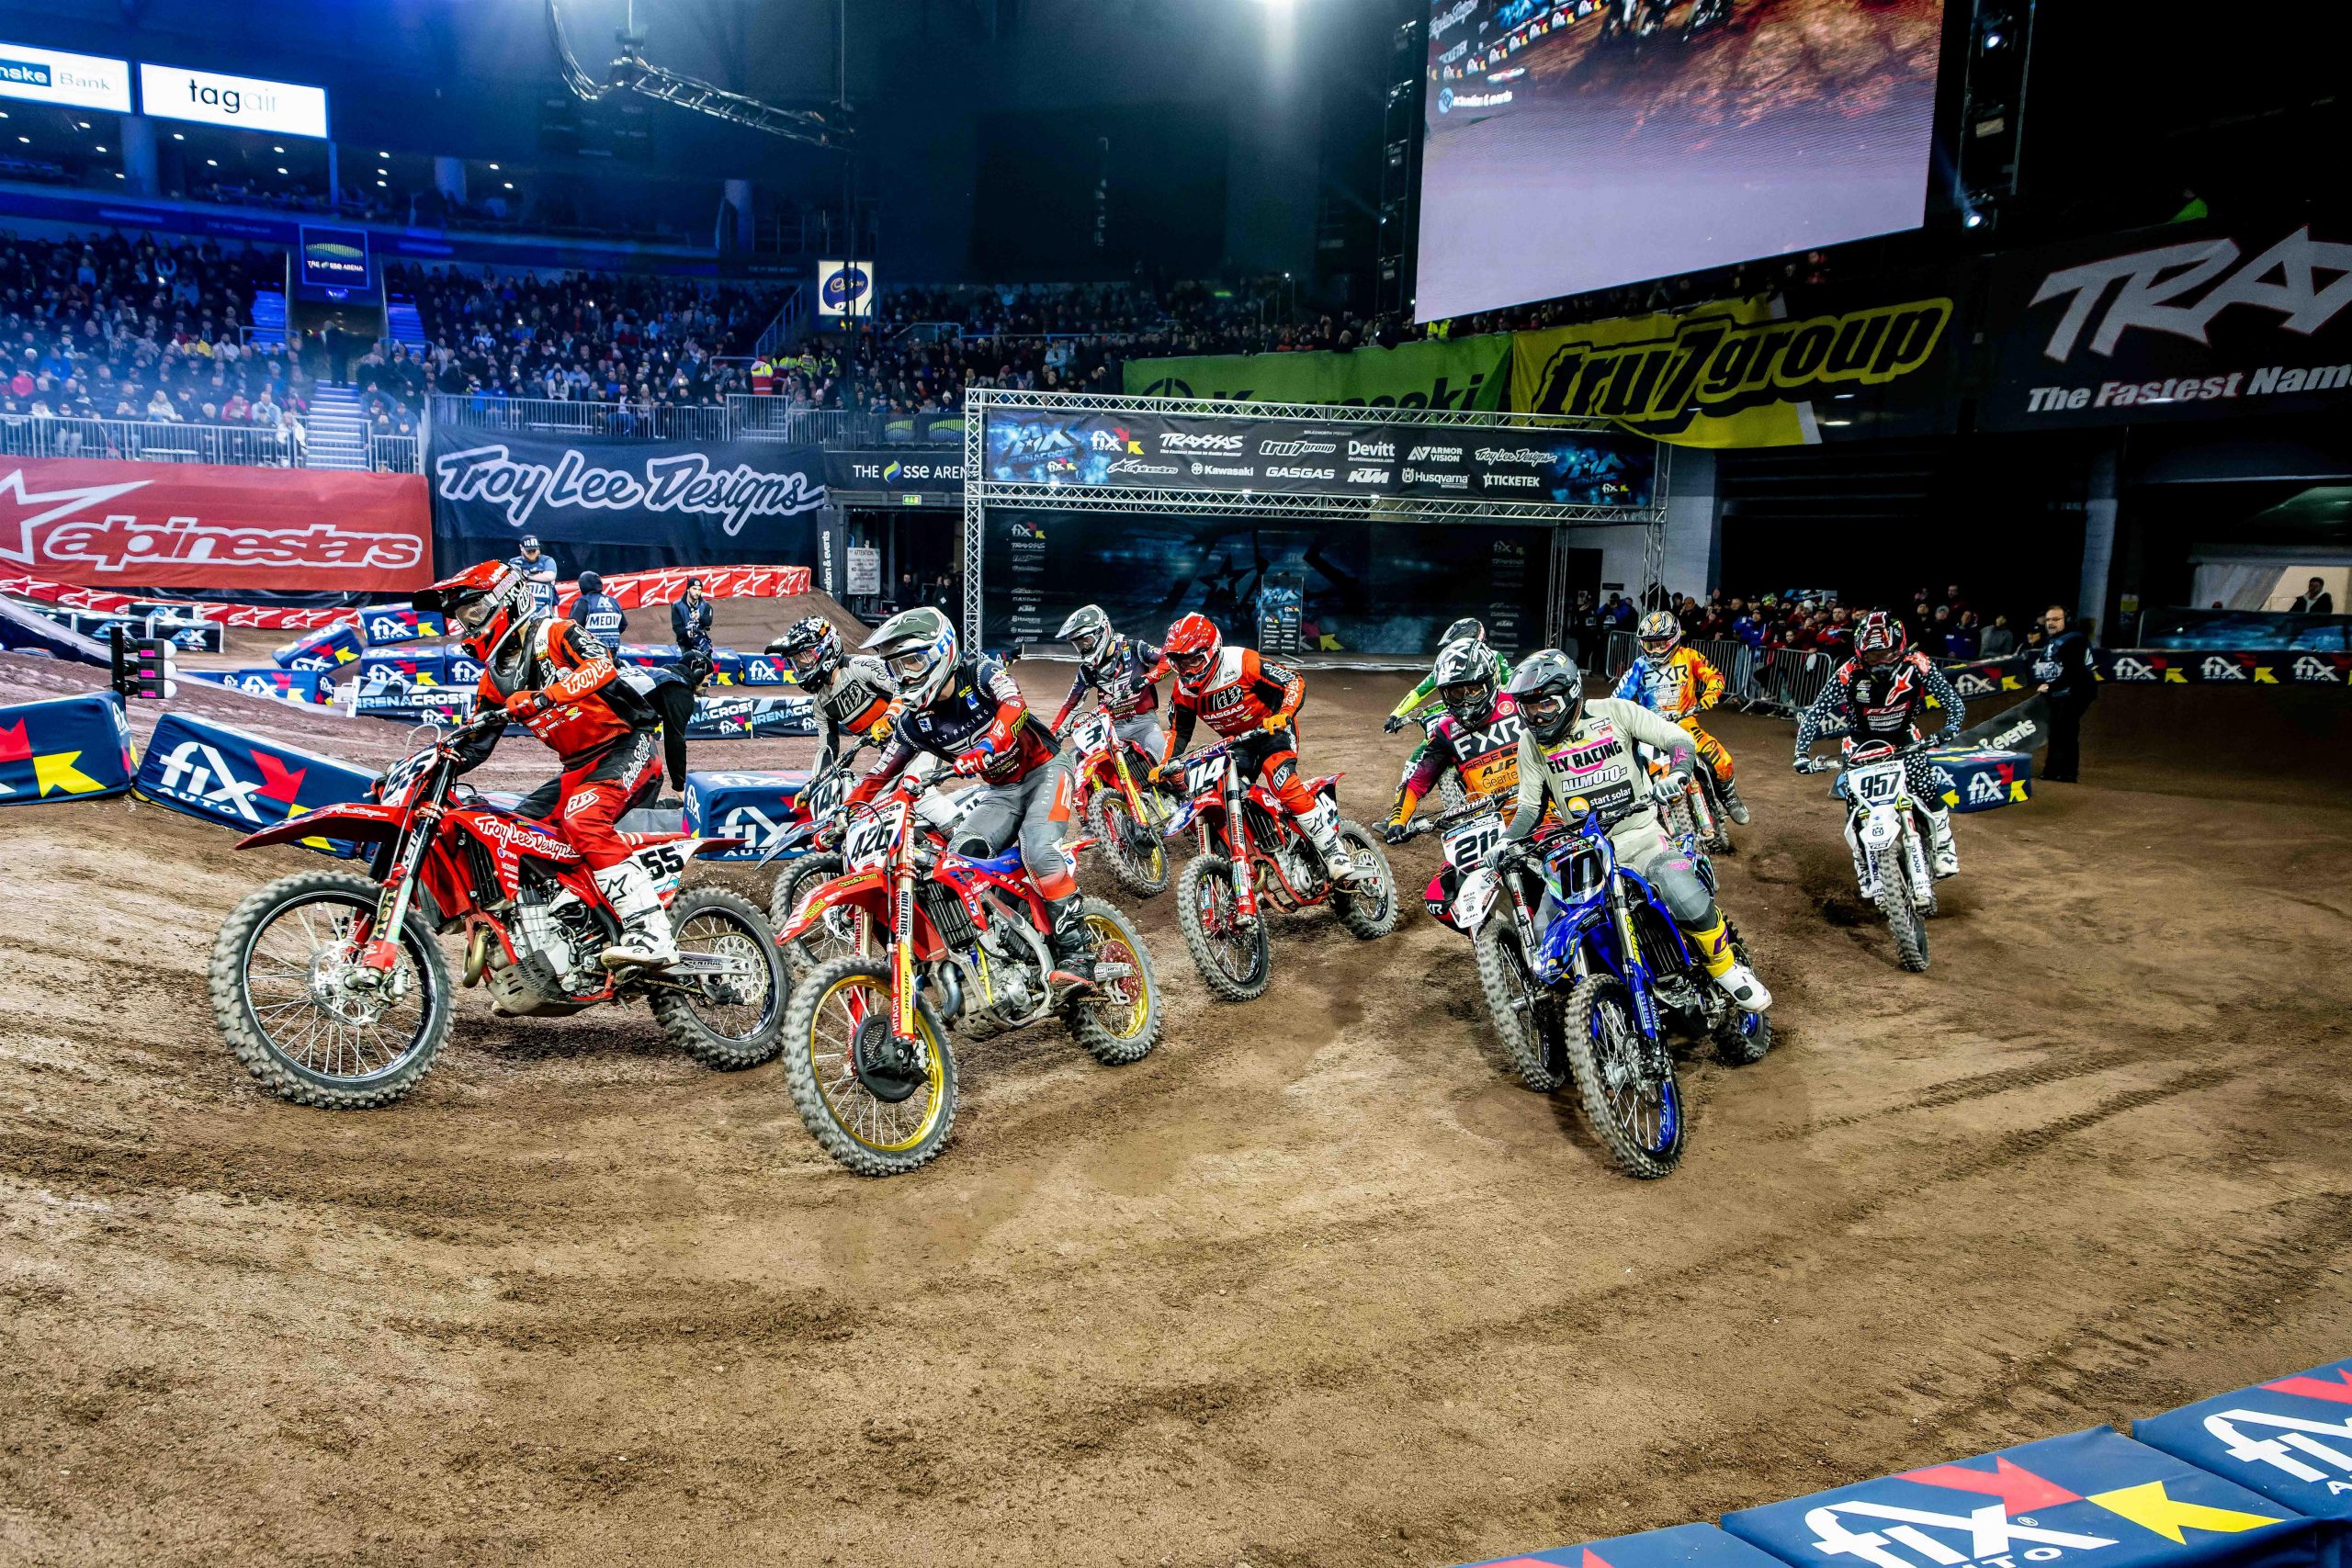 ARENACROSS RAISES THE ROOF IN PACKED OUT BELFAST ARENA